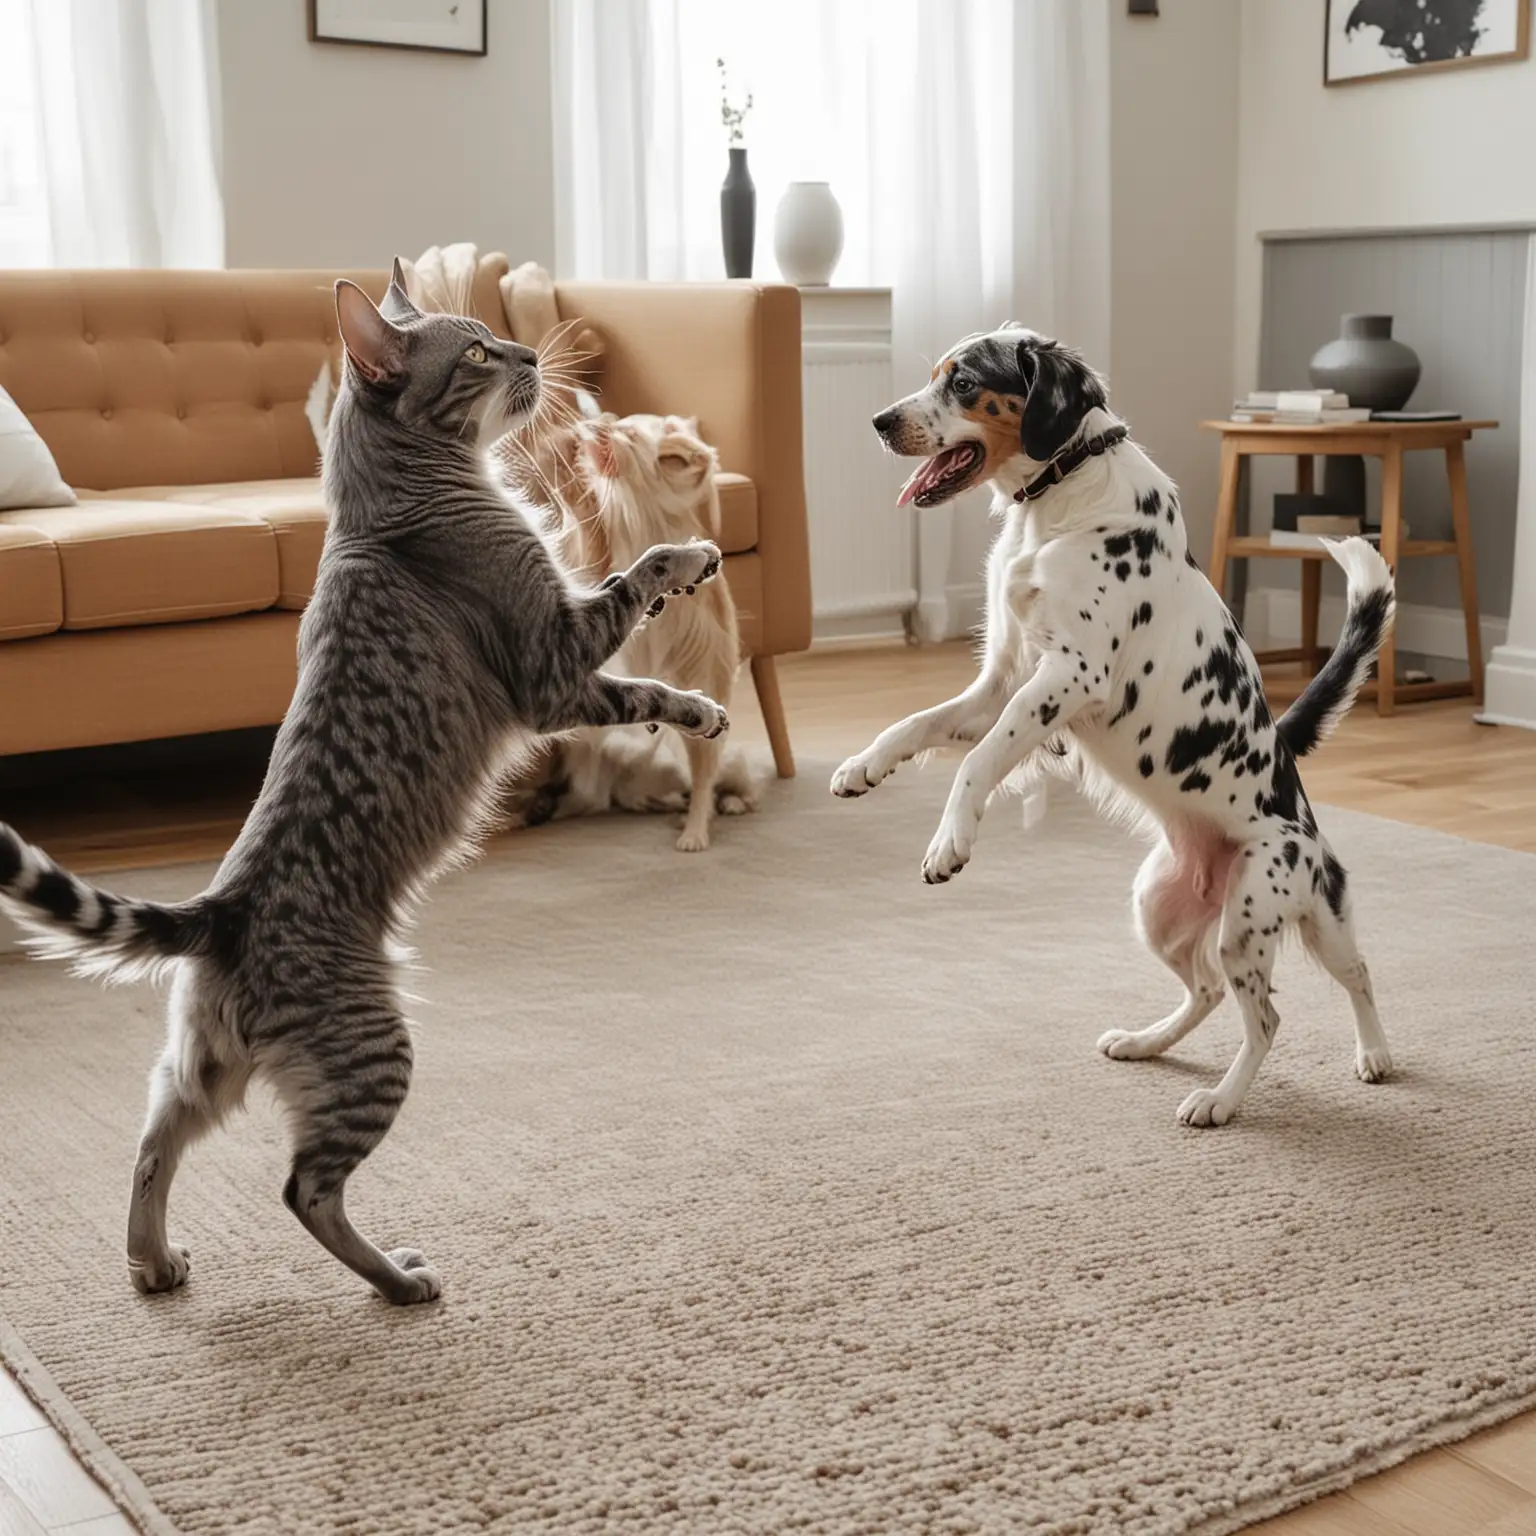 A GREY CAT FIGHTING WITH A BROWN GREY WITH WHITE SPOTS SETTER DOG IN A LIVING ROOM 